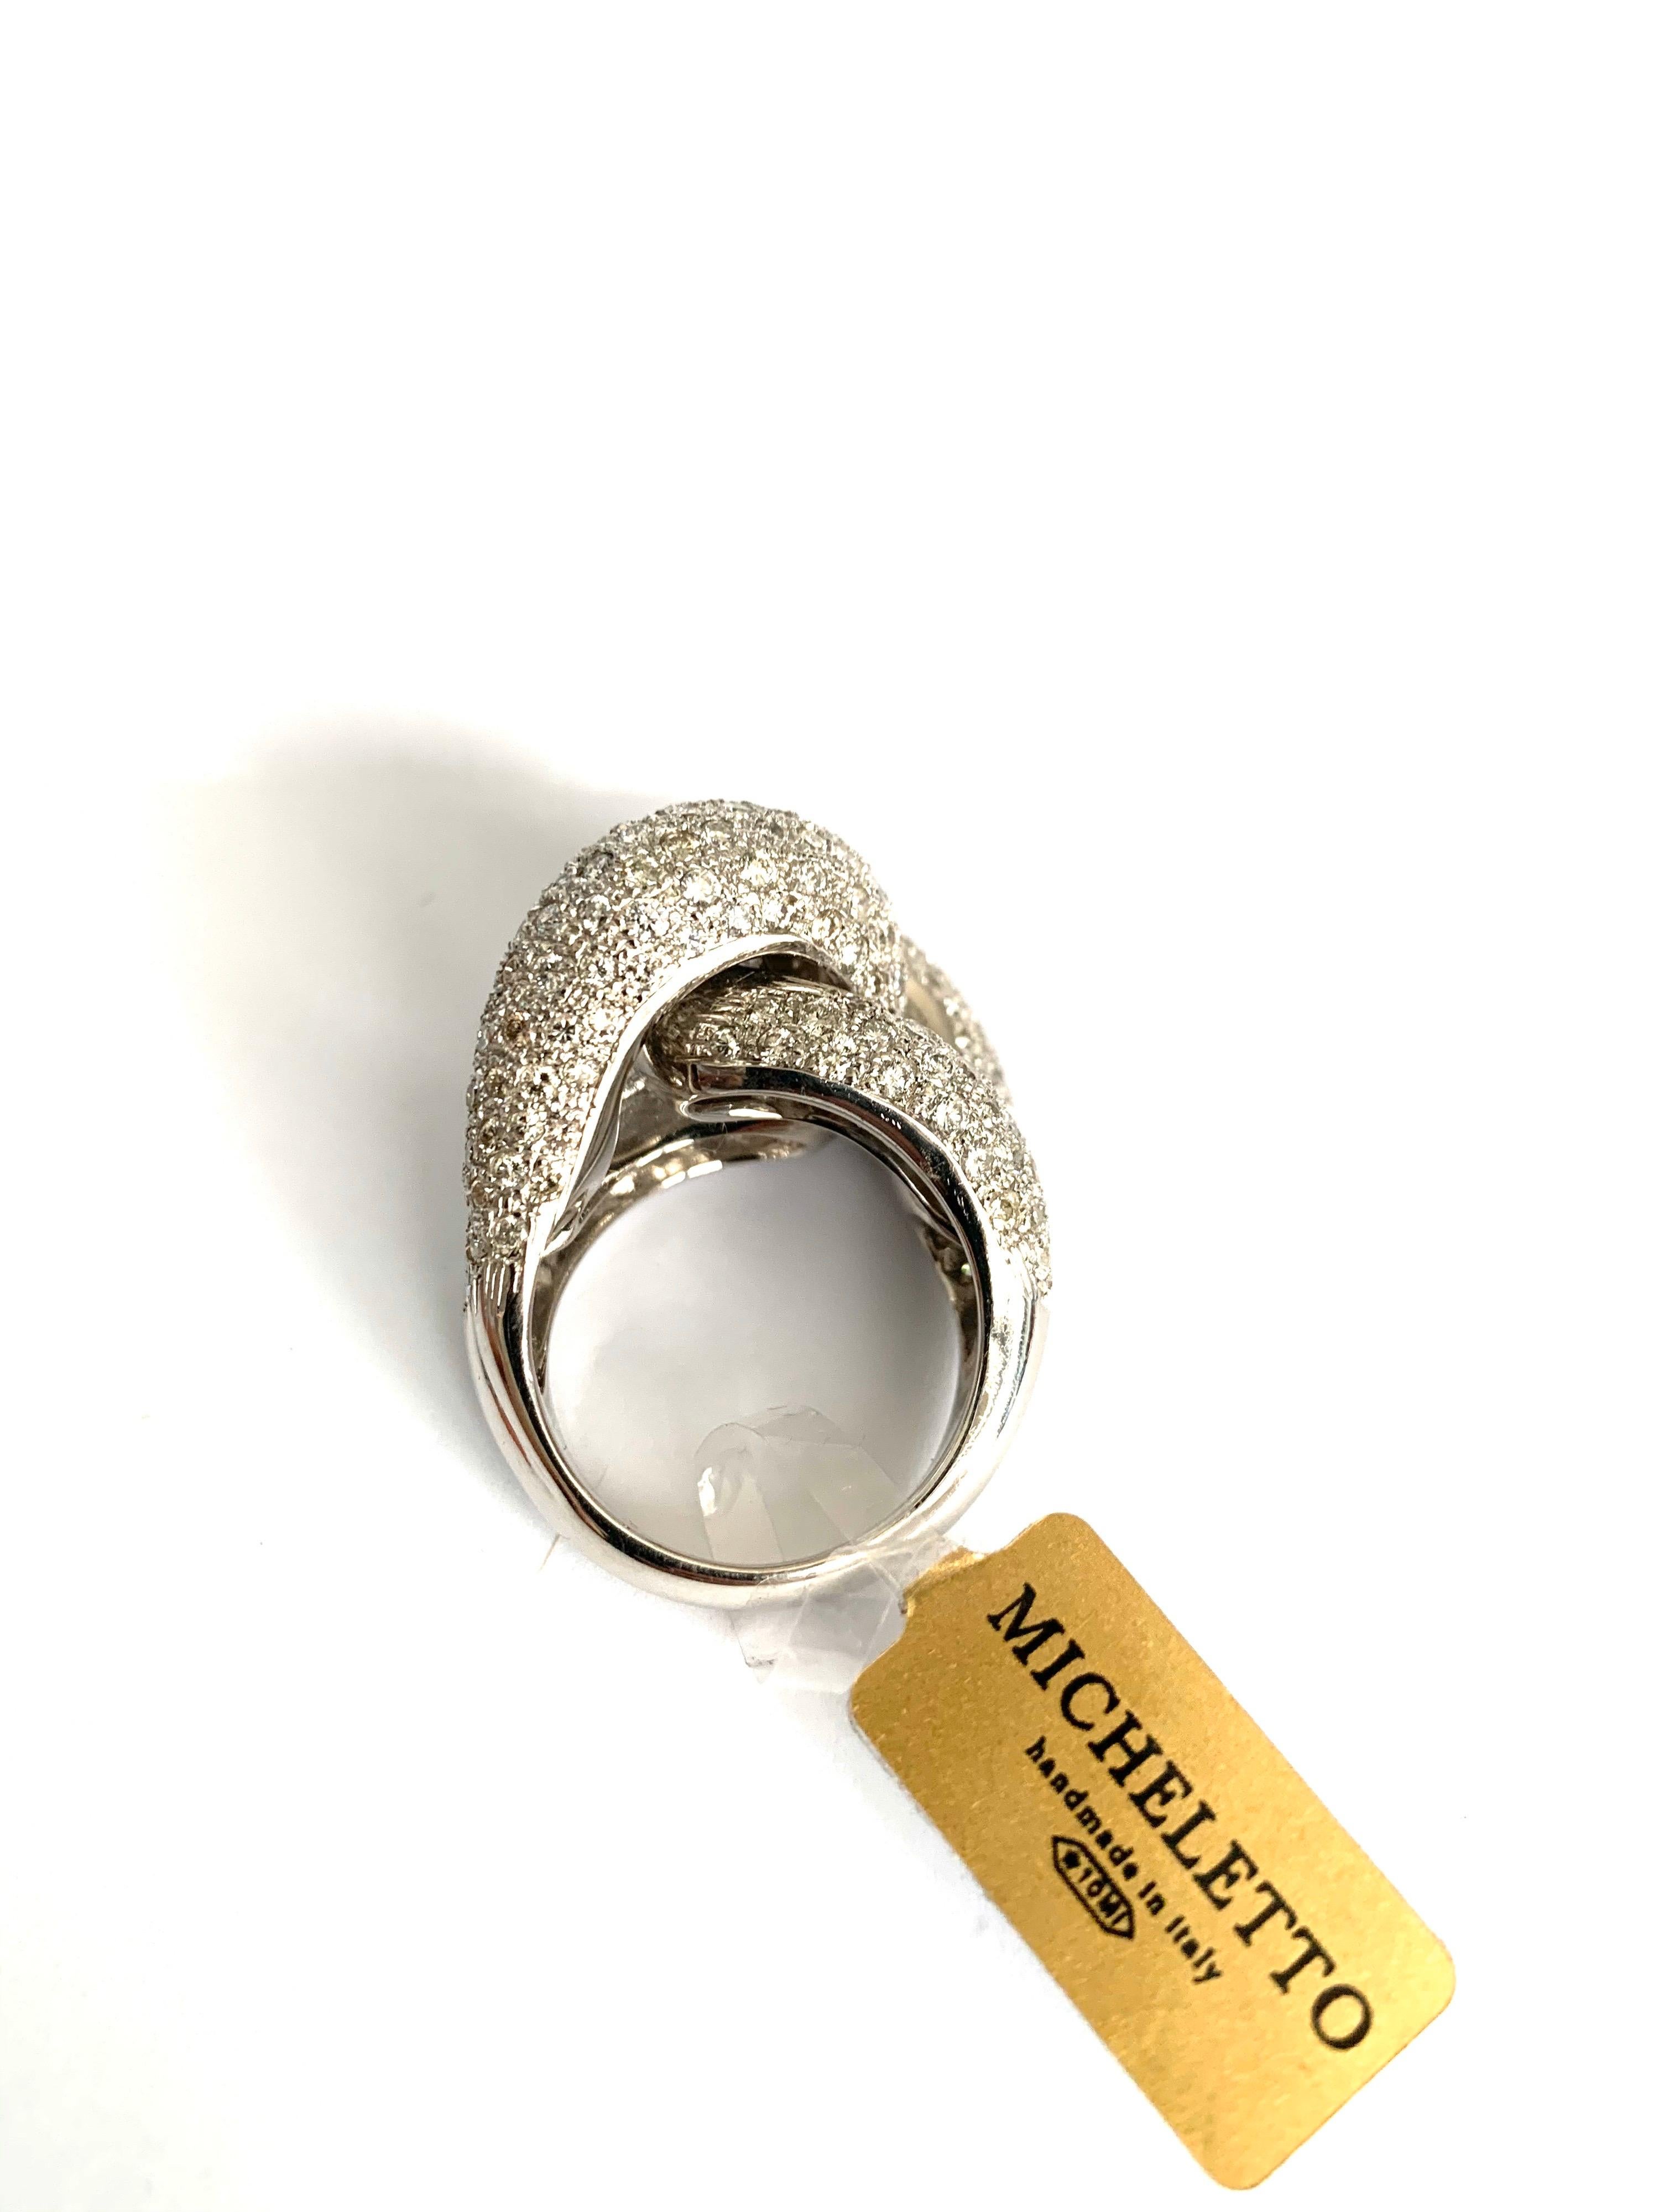 Mater groumette ring in 18 kt  white gold and white diamonds 
This iconic collection in Micheletto tradition find its masterpiece in this ring

the total weight of the gold is  gr 23.30
the total weight of the white diamonds is ct 5.23 - color GH